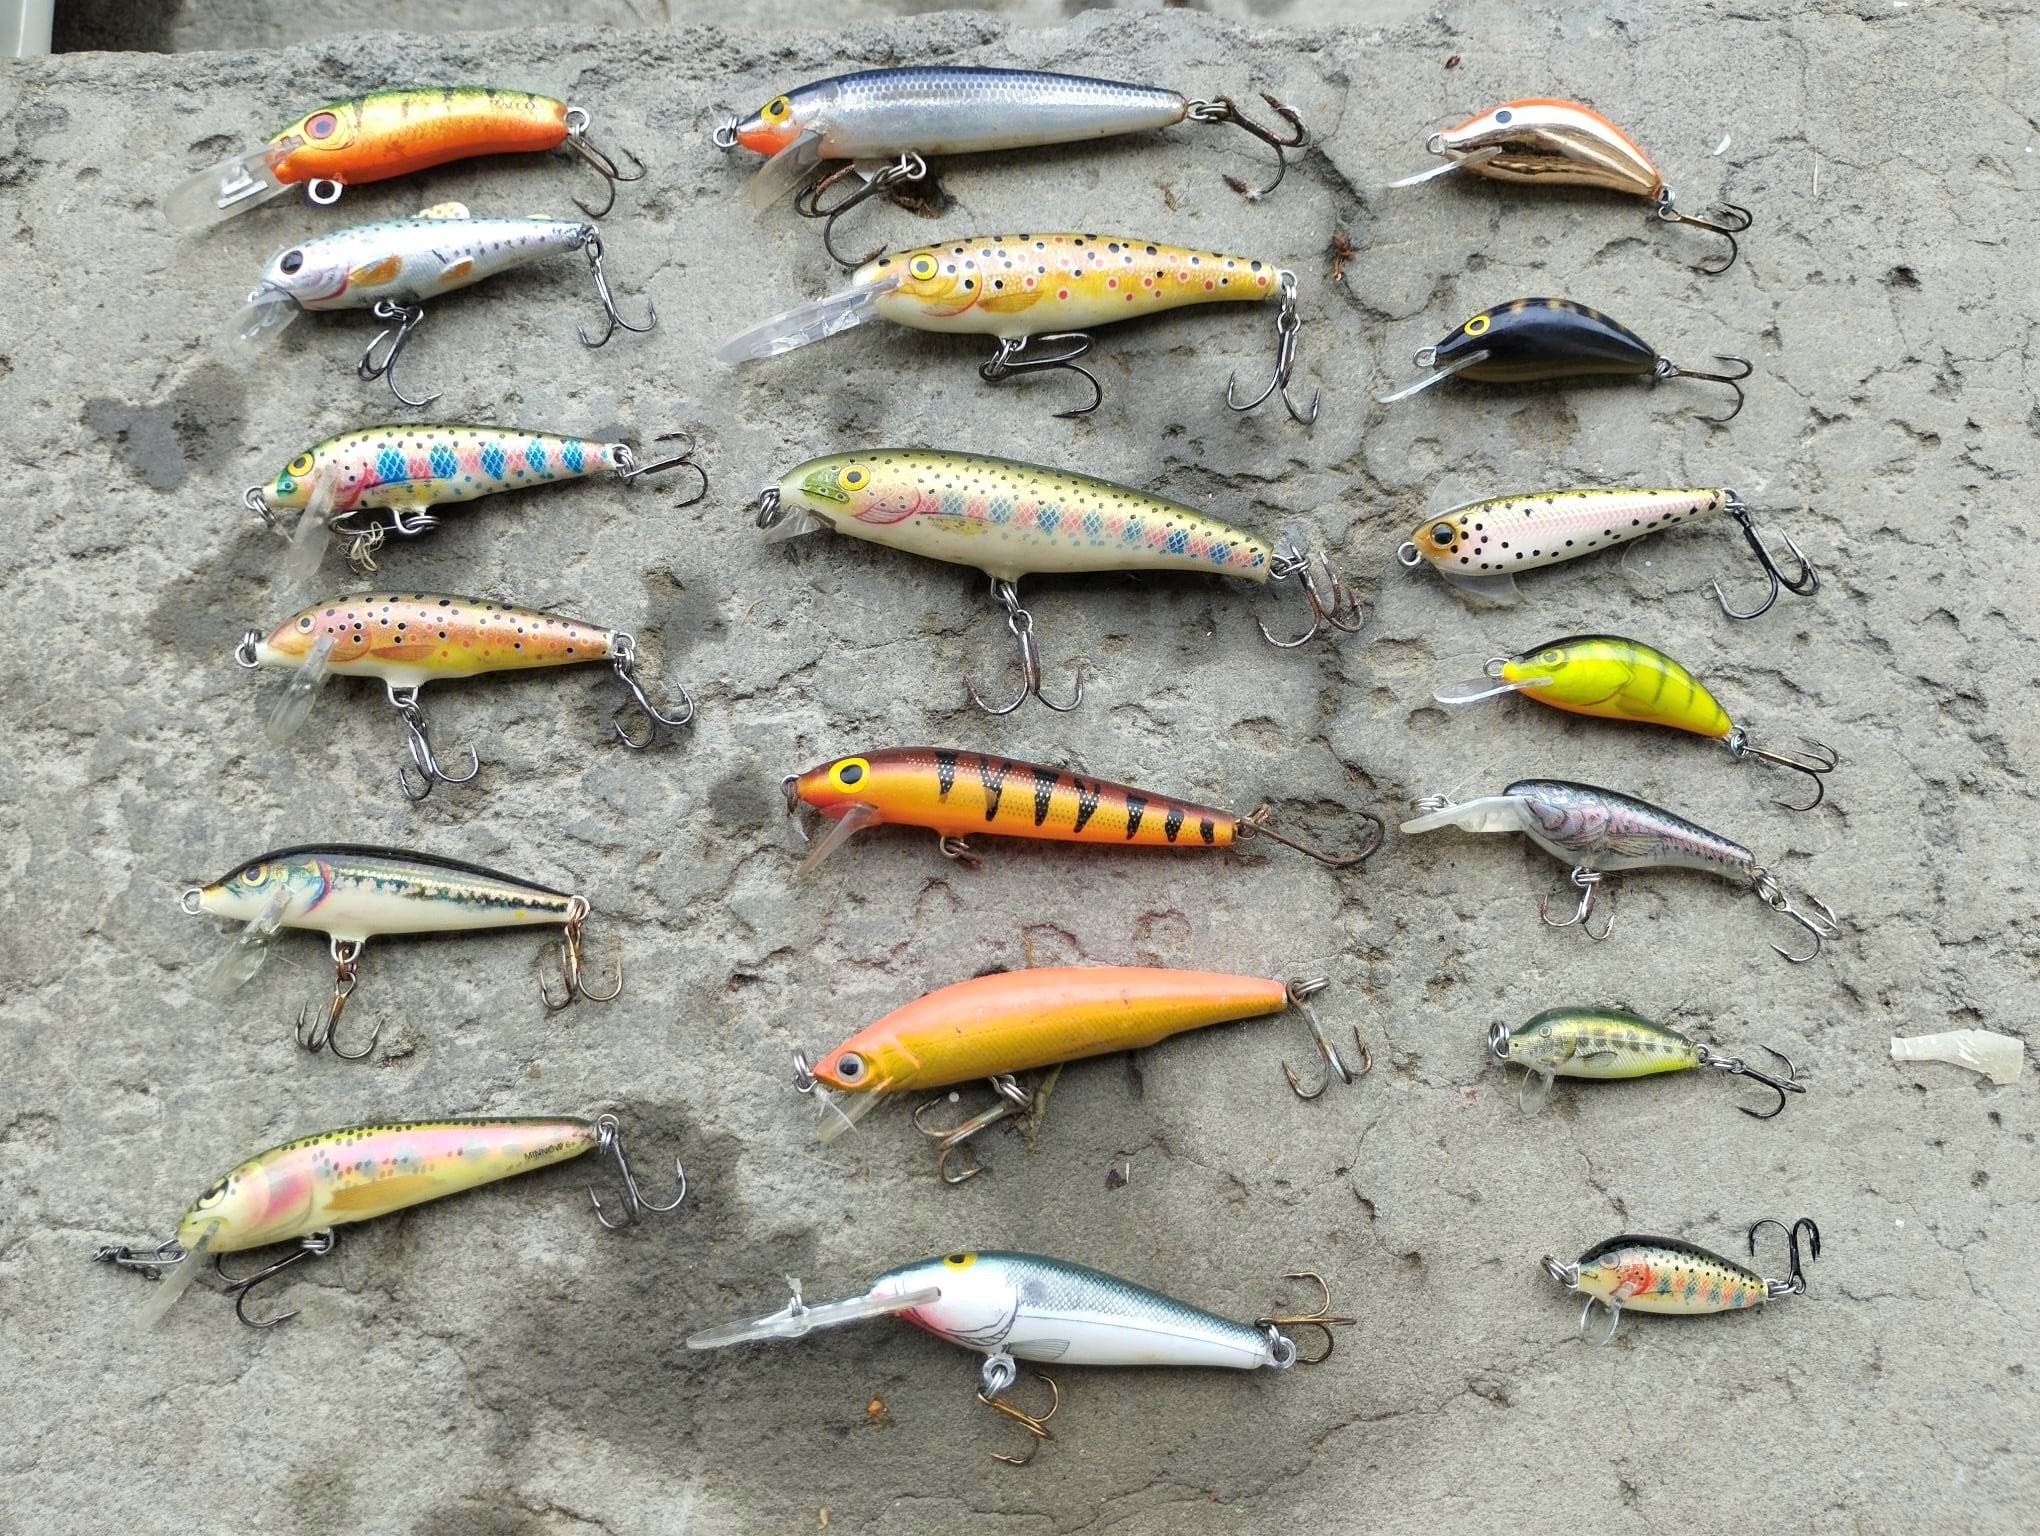 Many different jerkbaits, some of which are excellent trout catchers